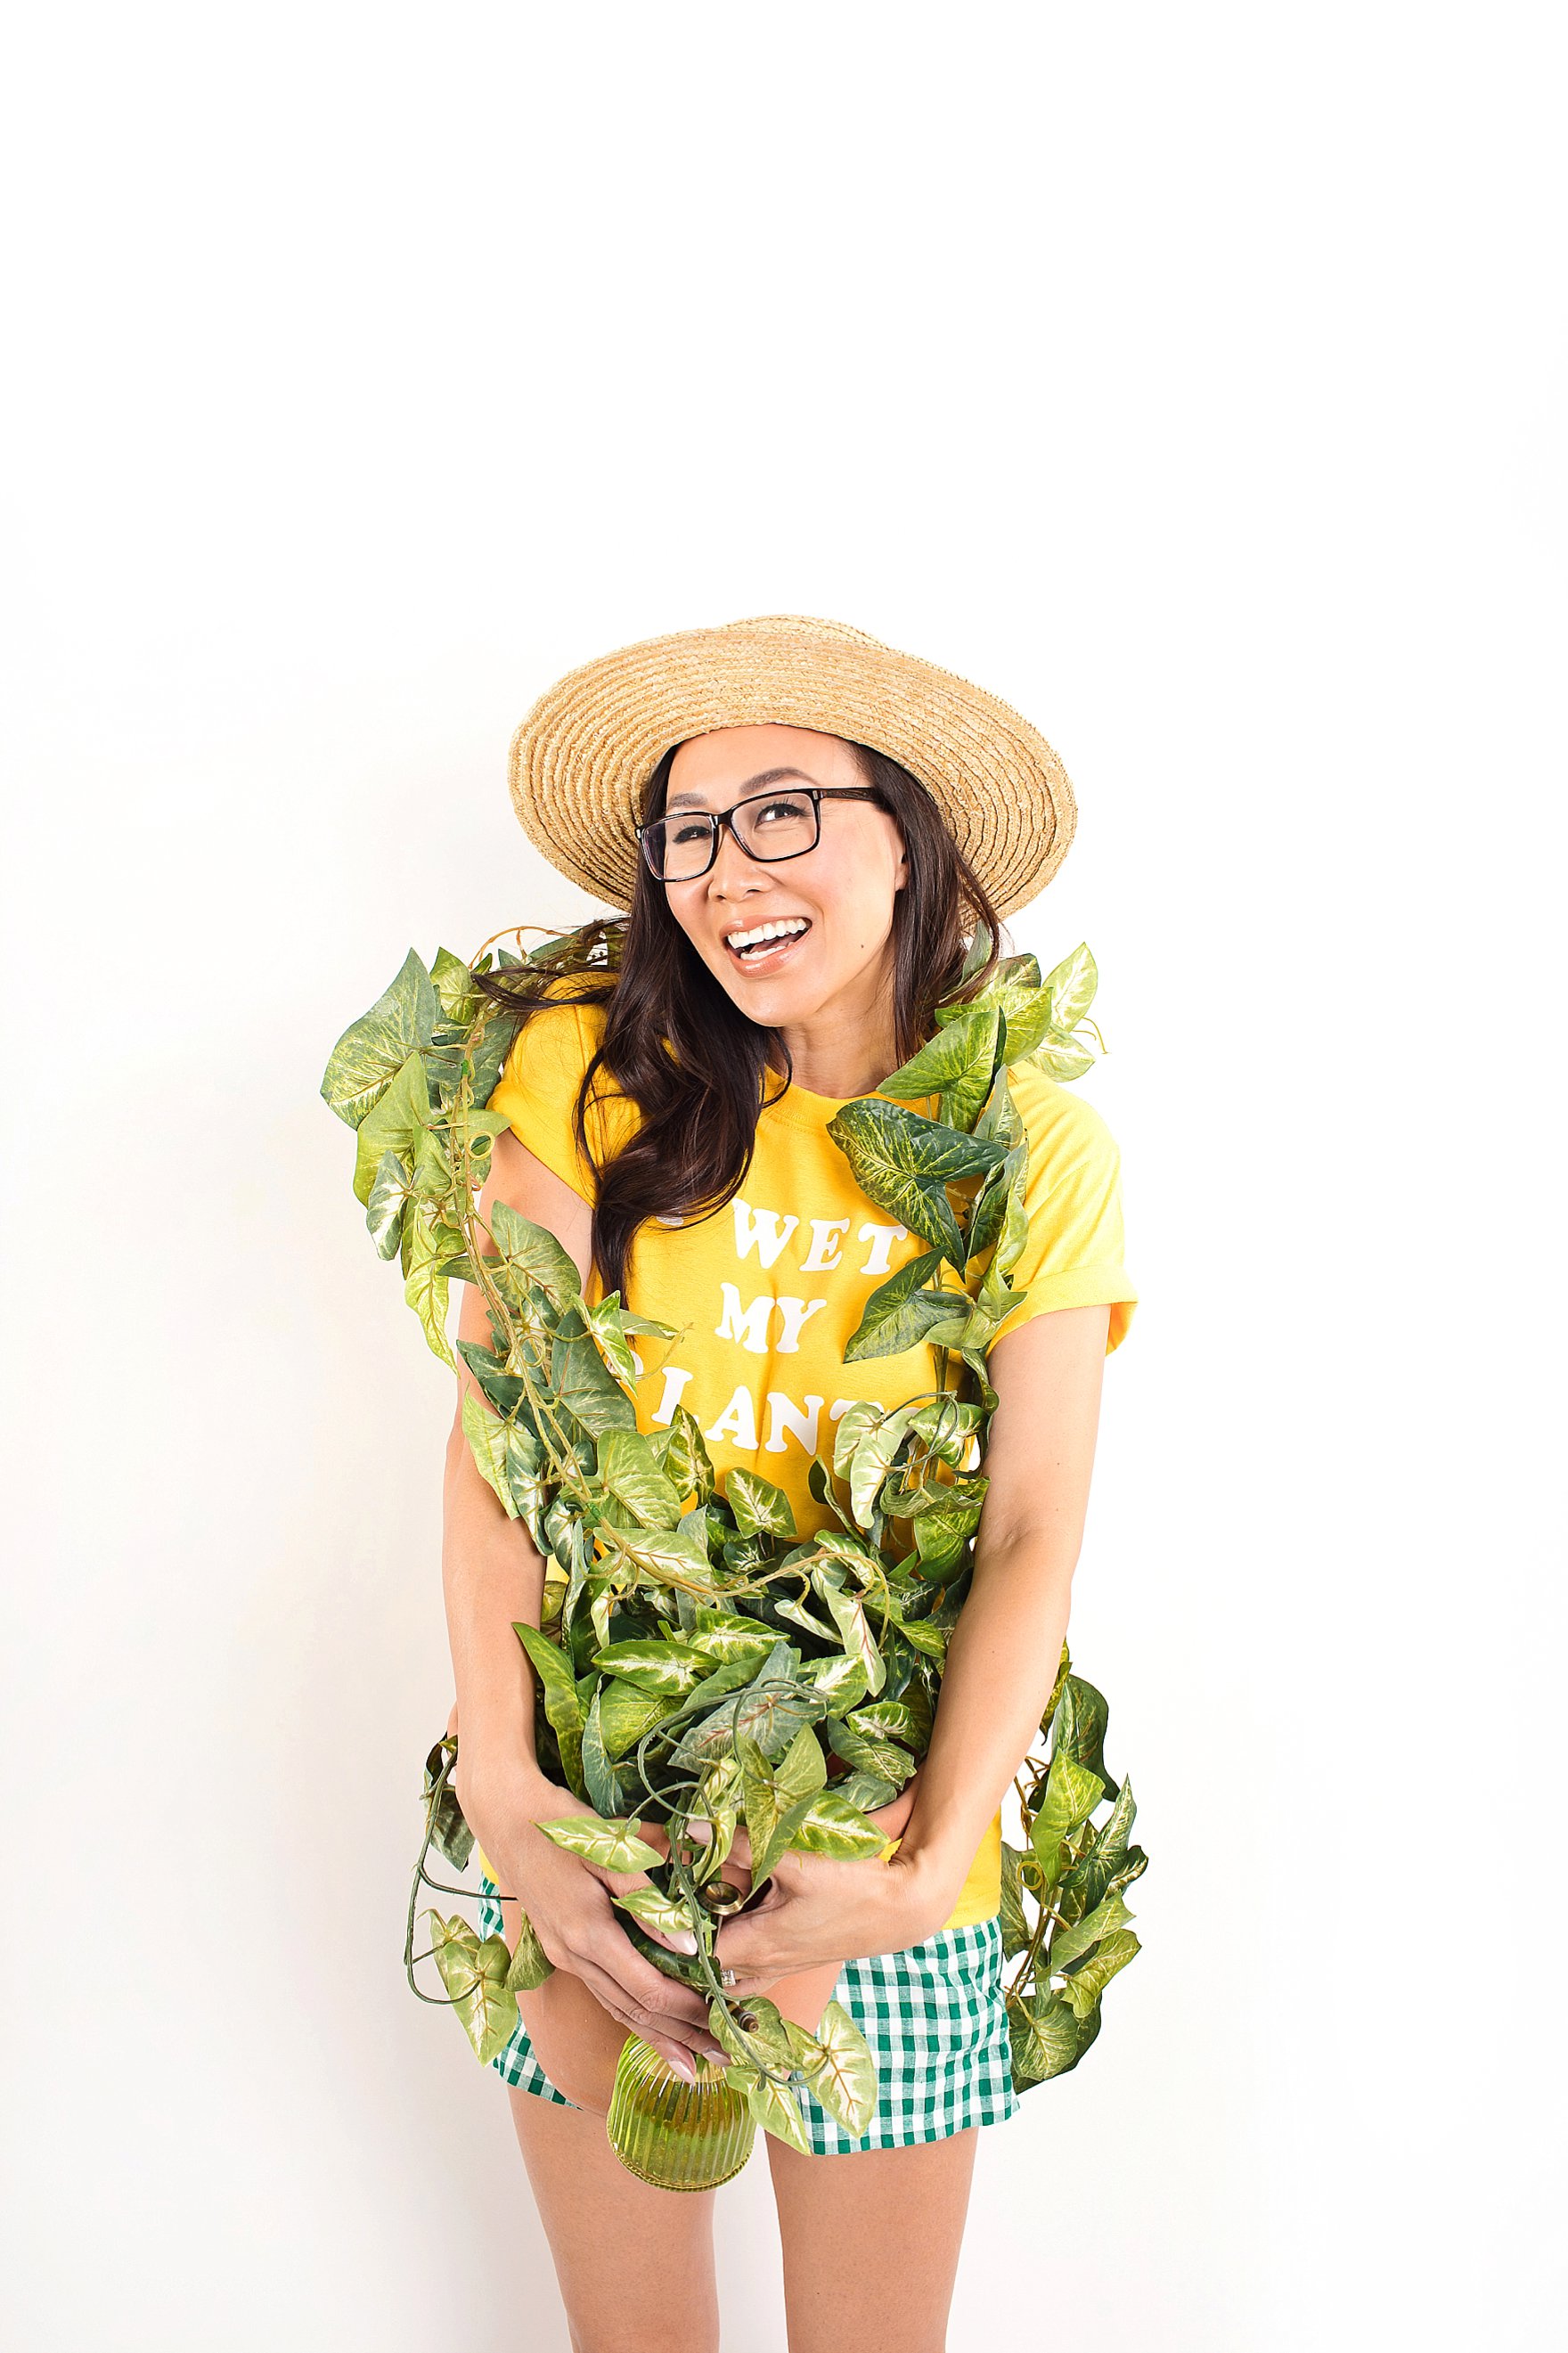 crazy plant lady costume halloween last minute funny plant shirts I wet my plants